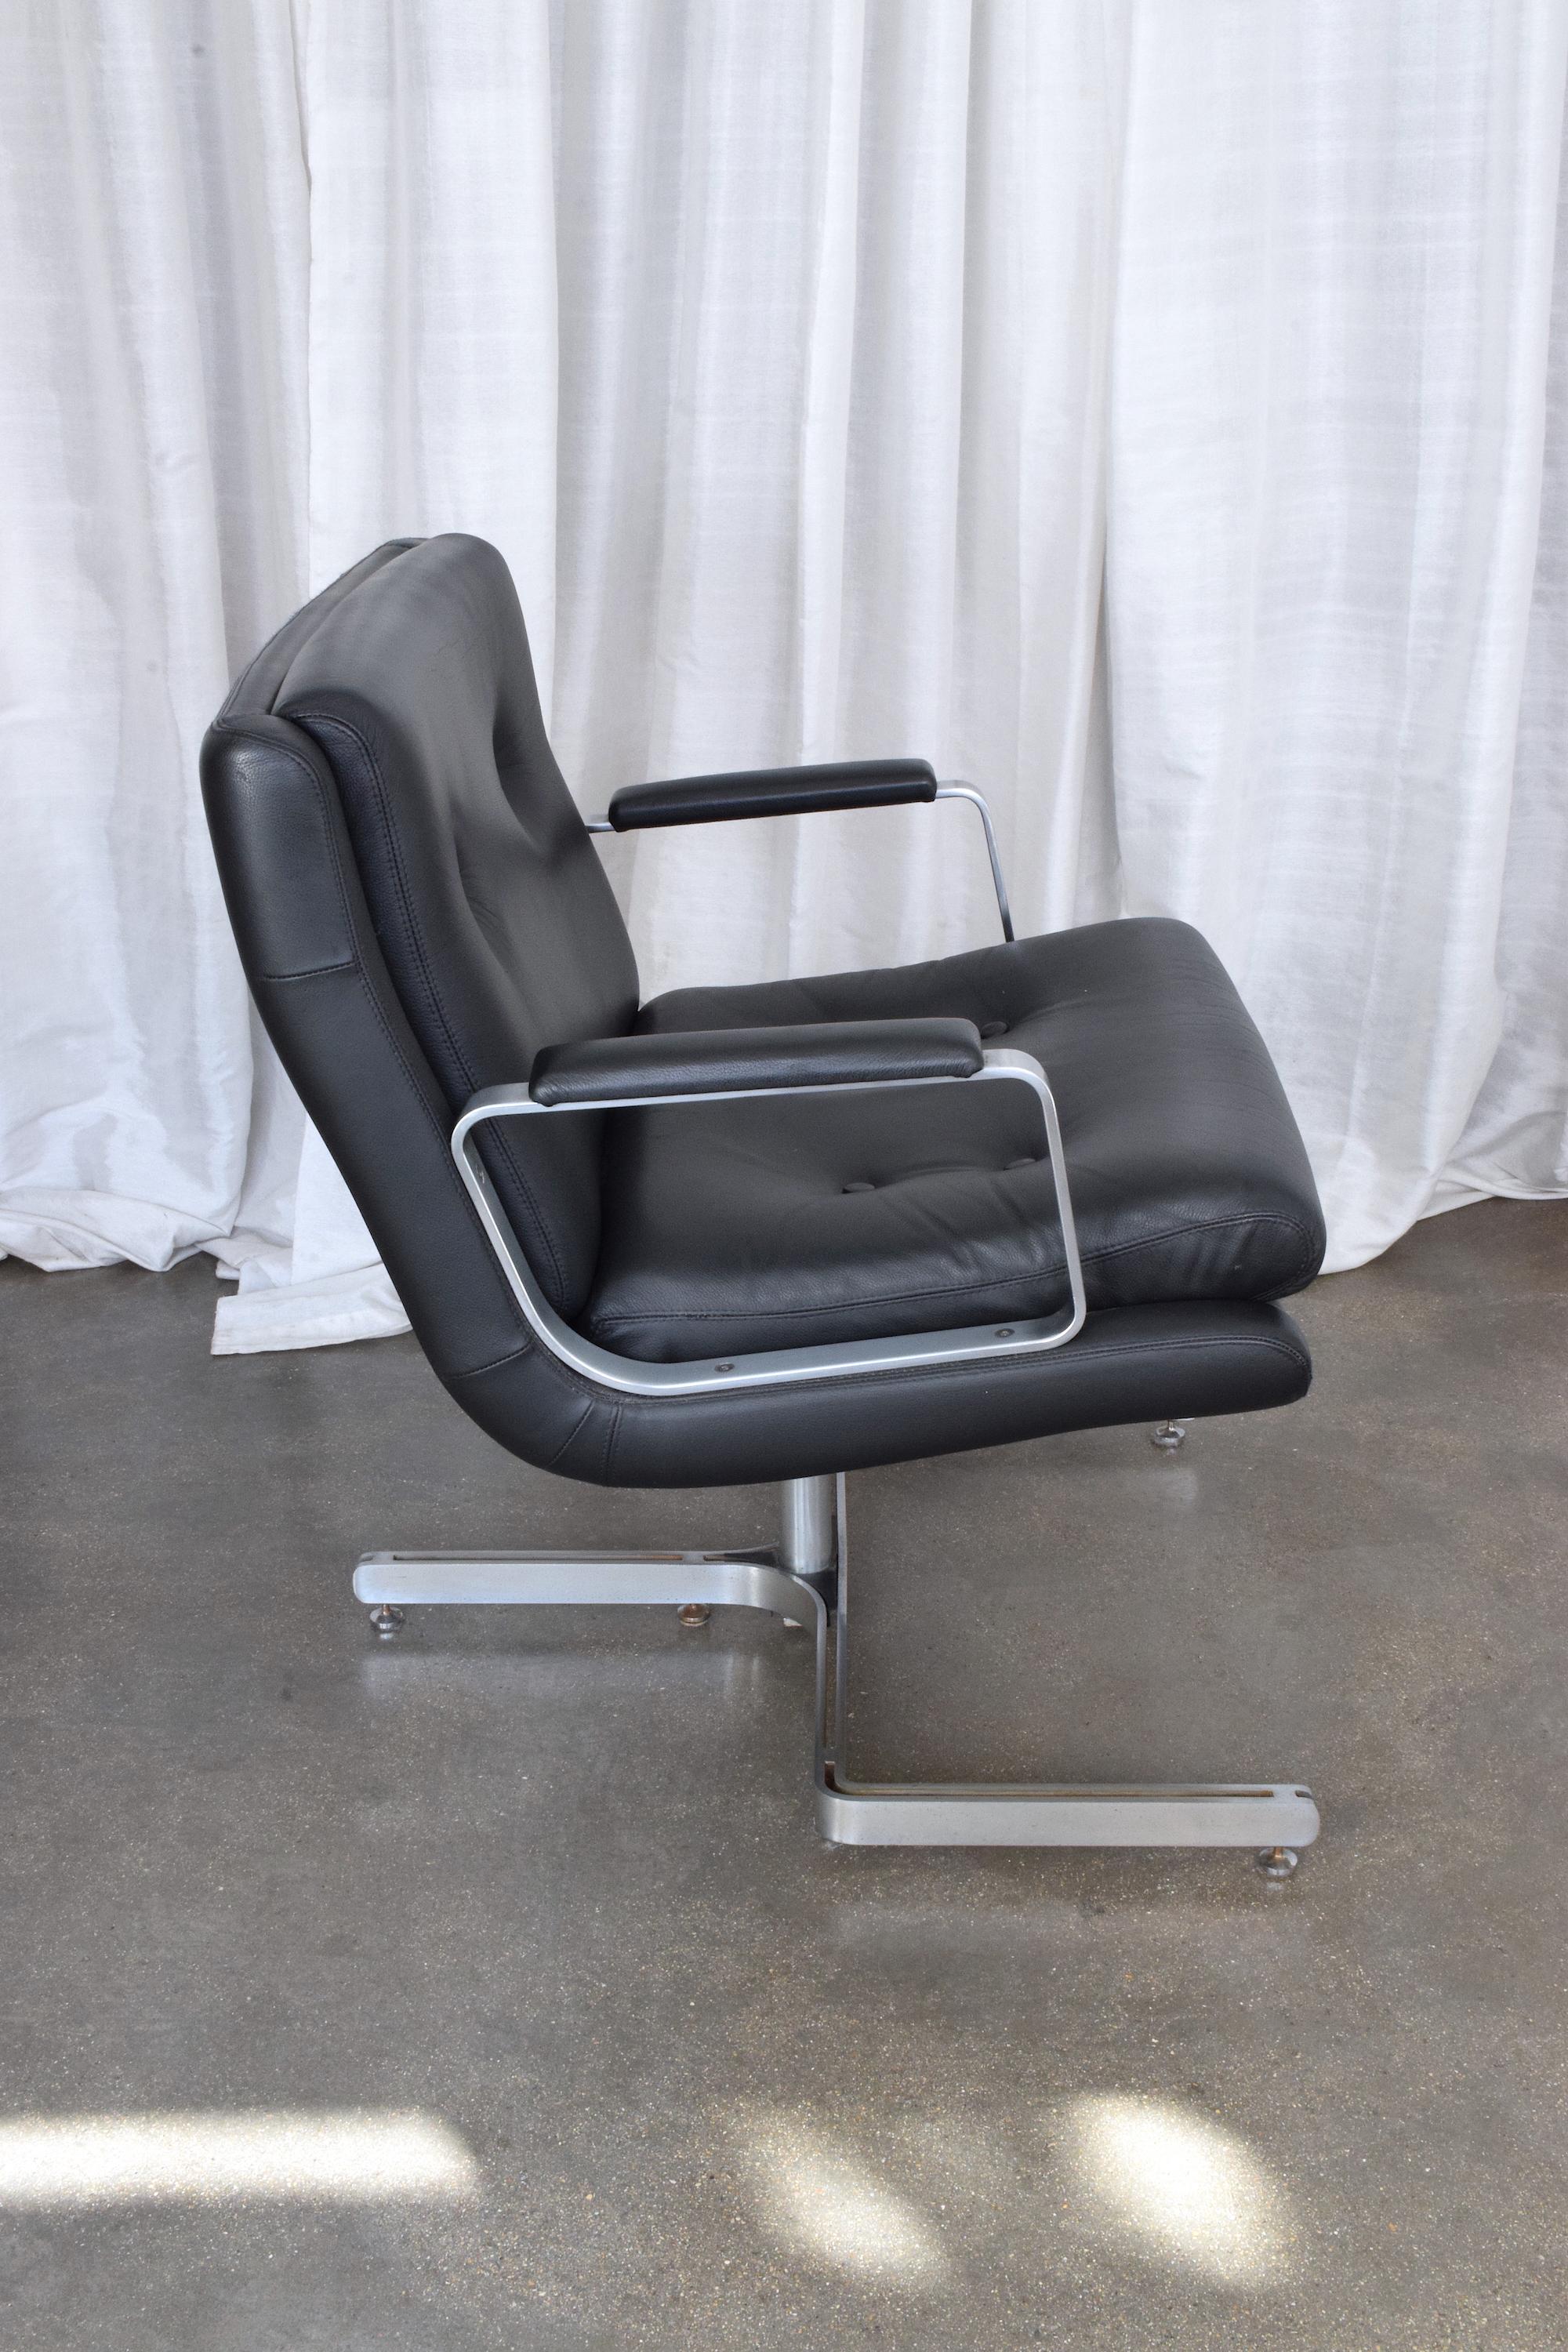 A highly collectible vintage lounge or office chairs by iconic French designer Raphael Raffel designed in stainless steel and black leather with its distinctive tripod shaped structure.
We have included two images of the book in which this model